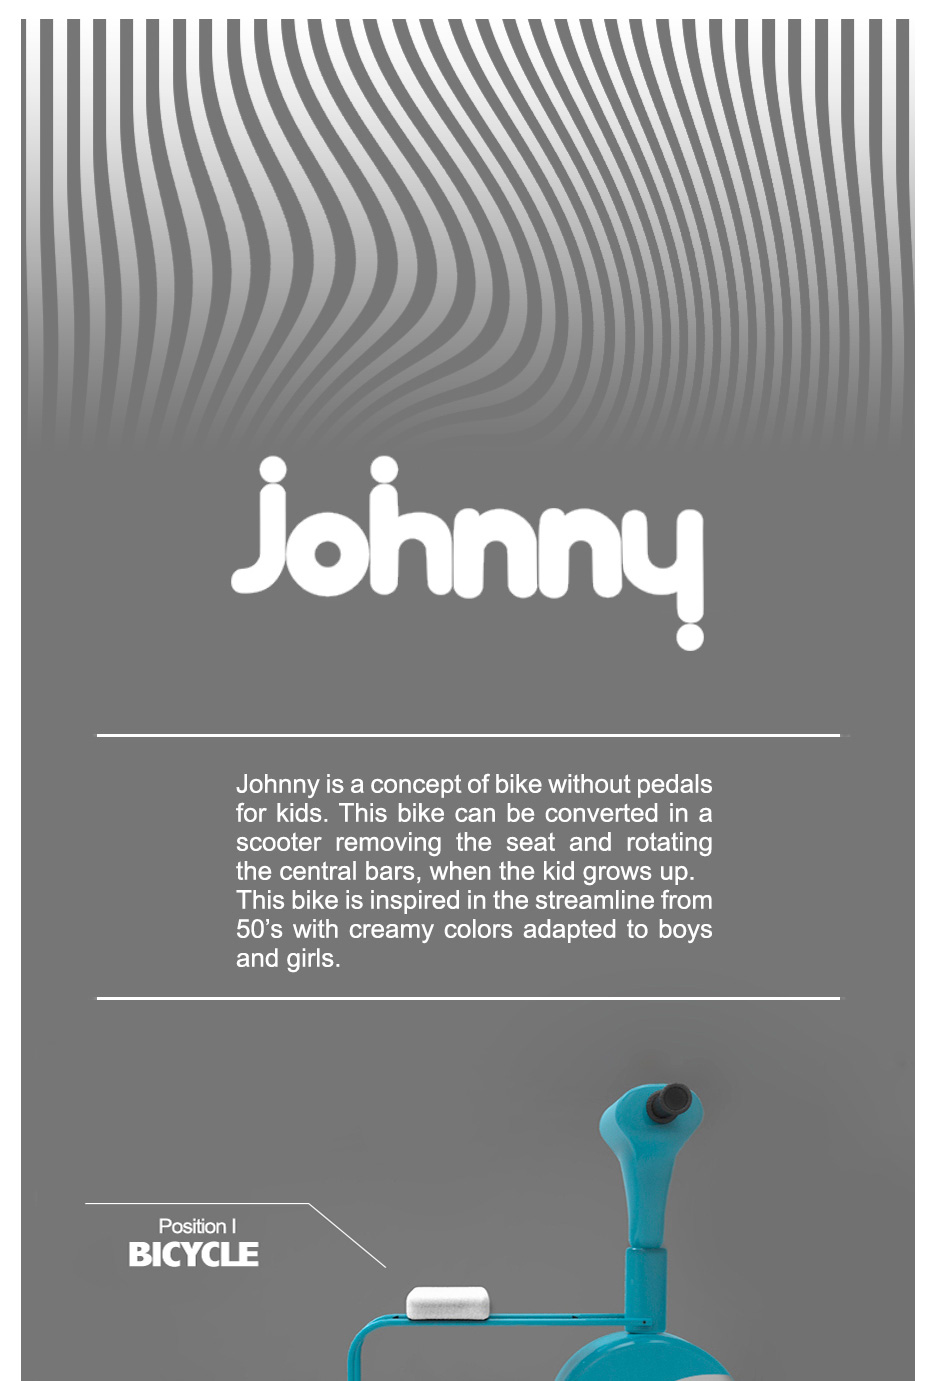 Johnny  is a concept bike without pedals for kids